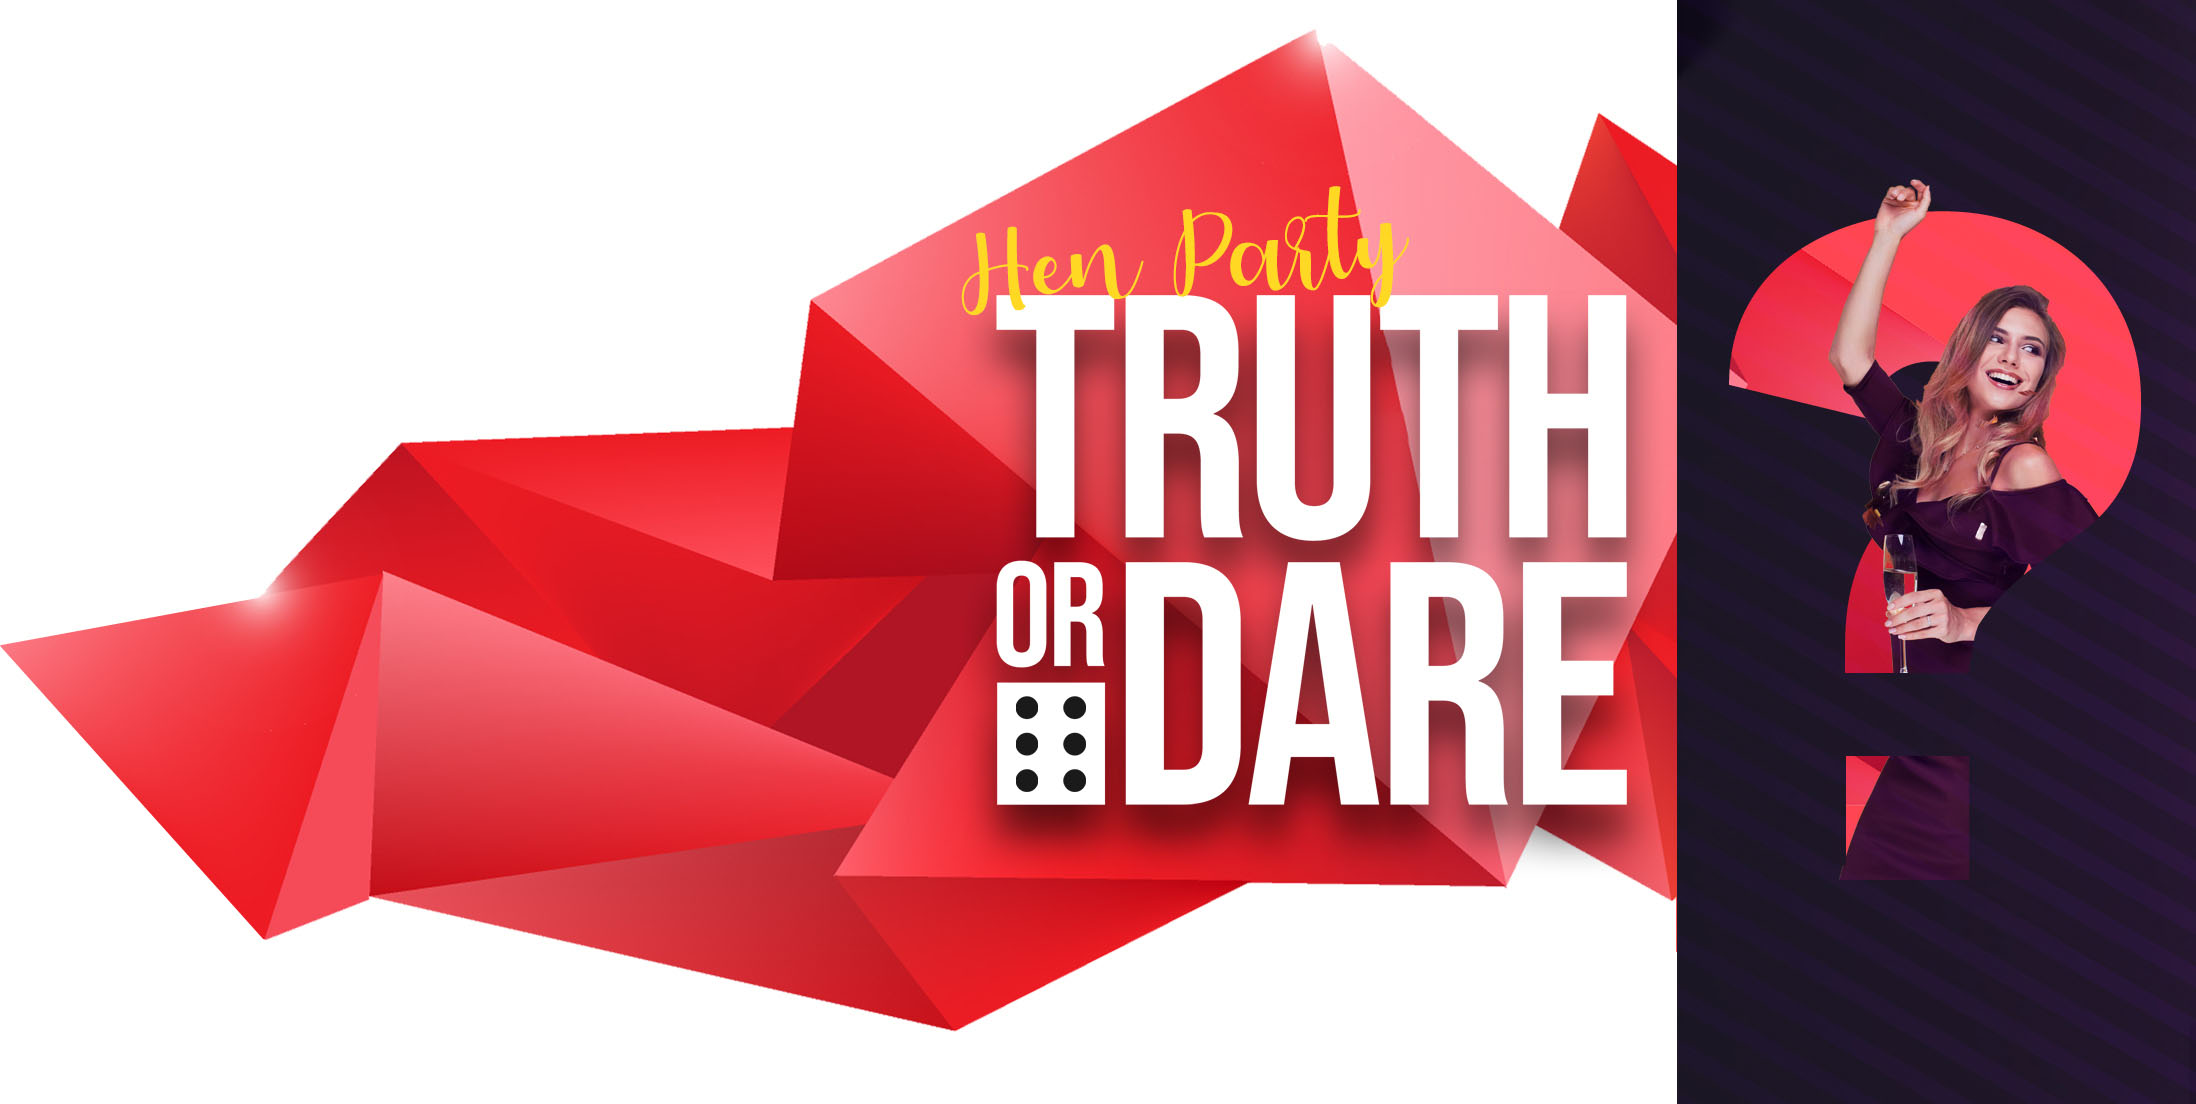 Hen Party Truth or Dare Questions